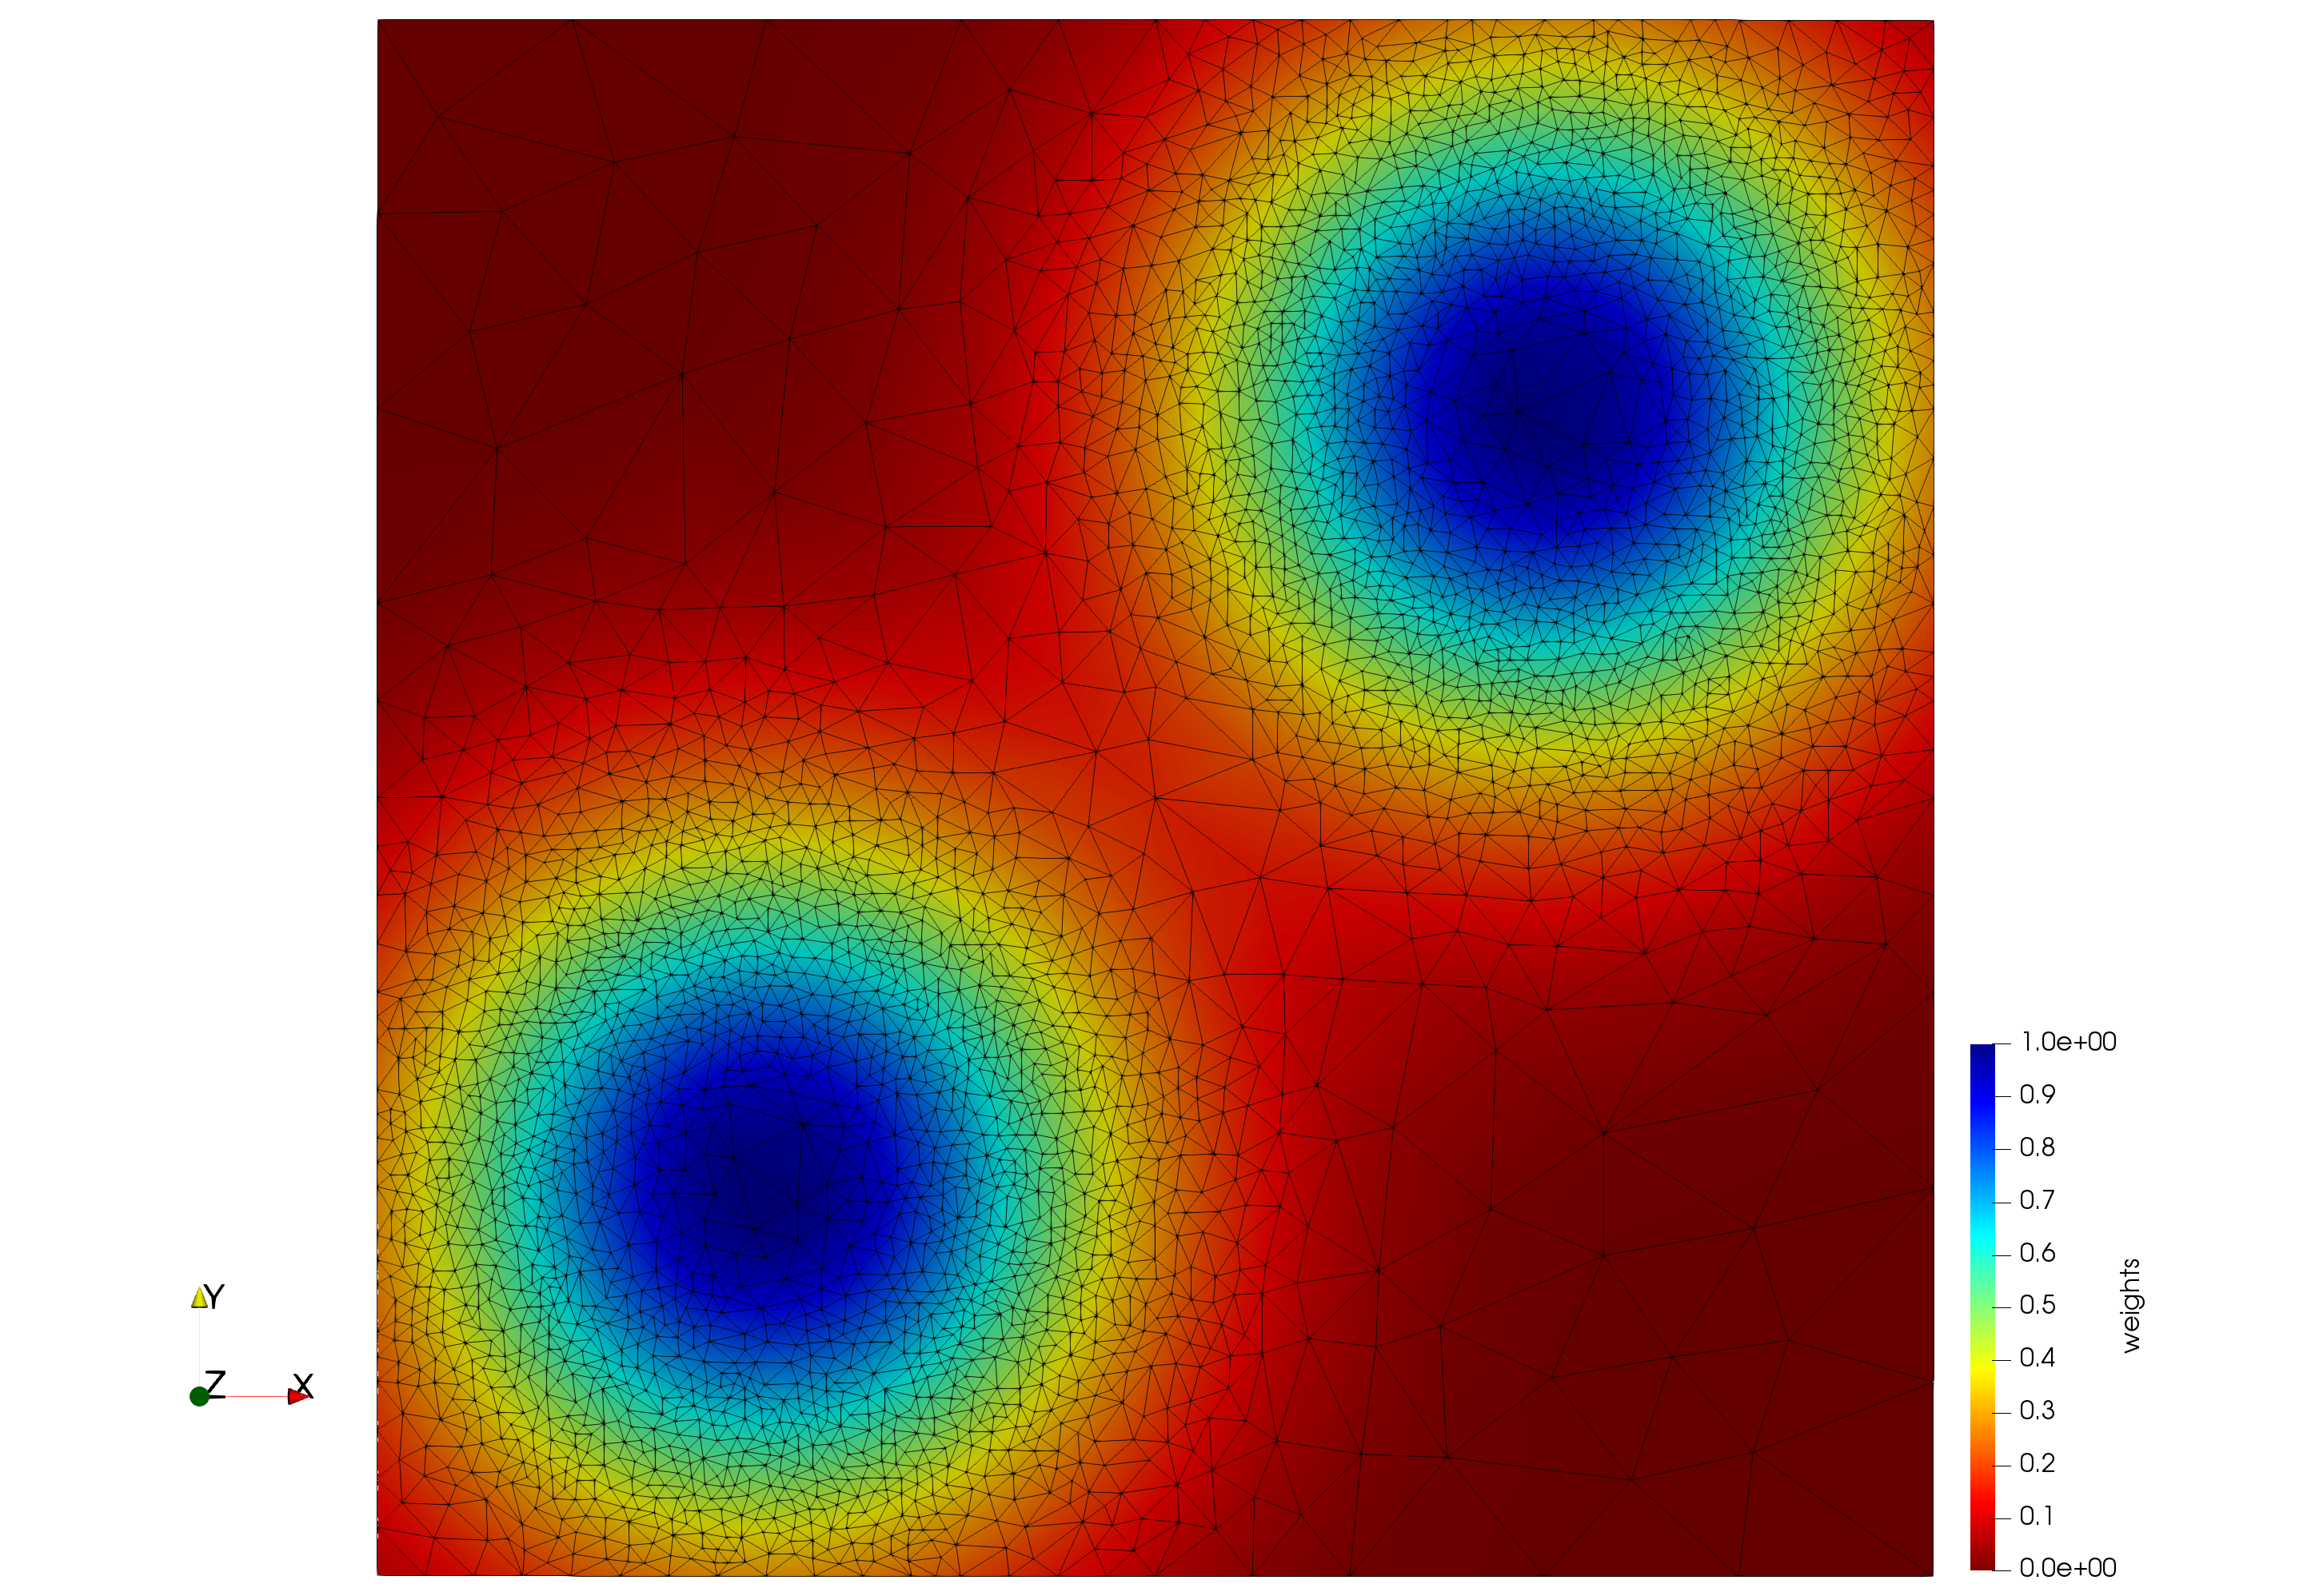 Gaussian me 10 wl 1e-1 adapted.png